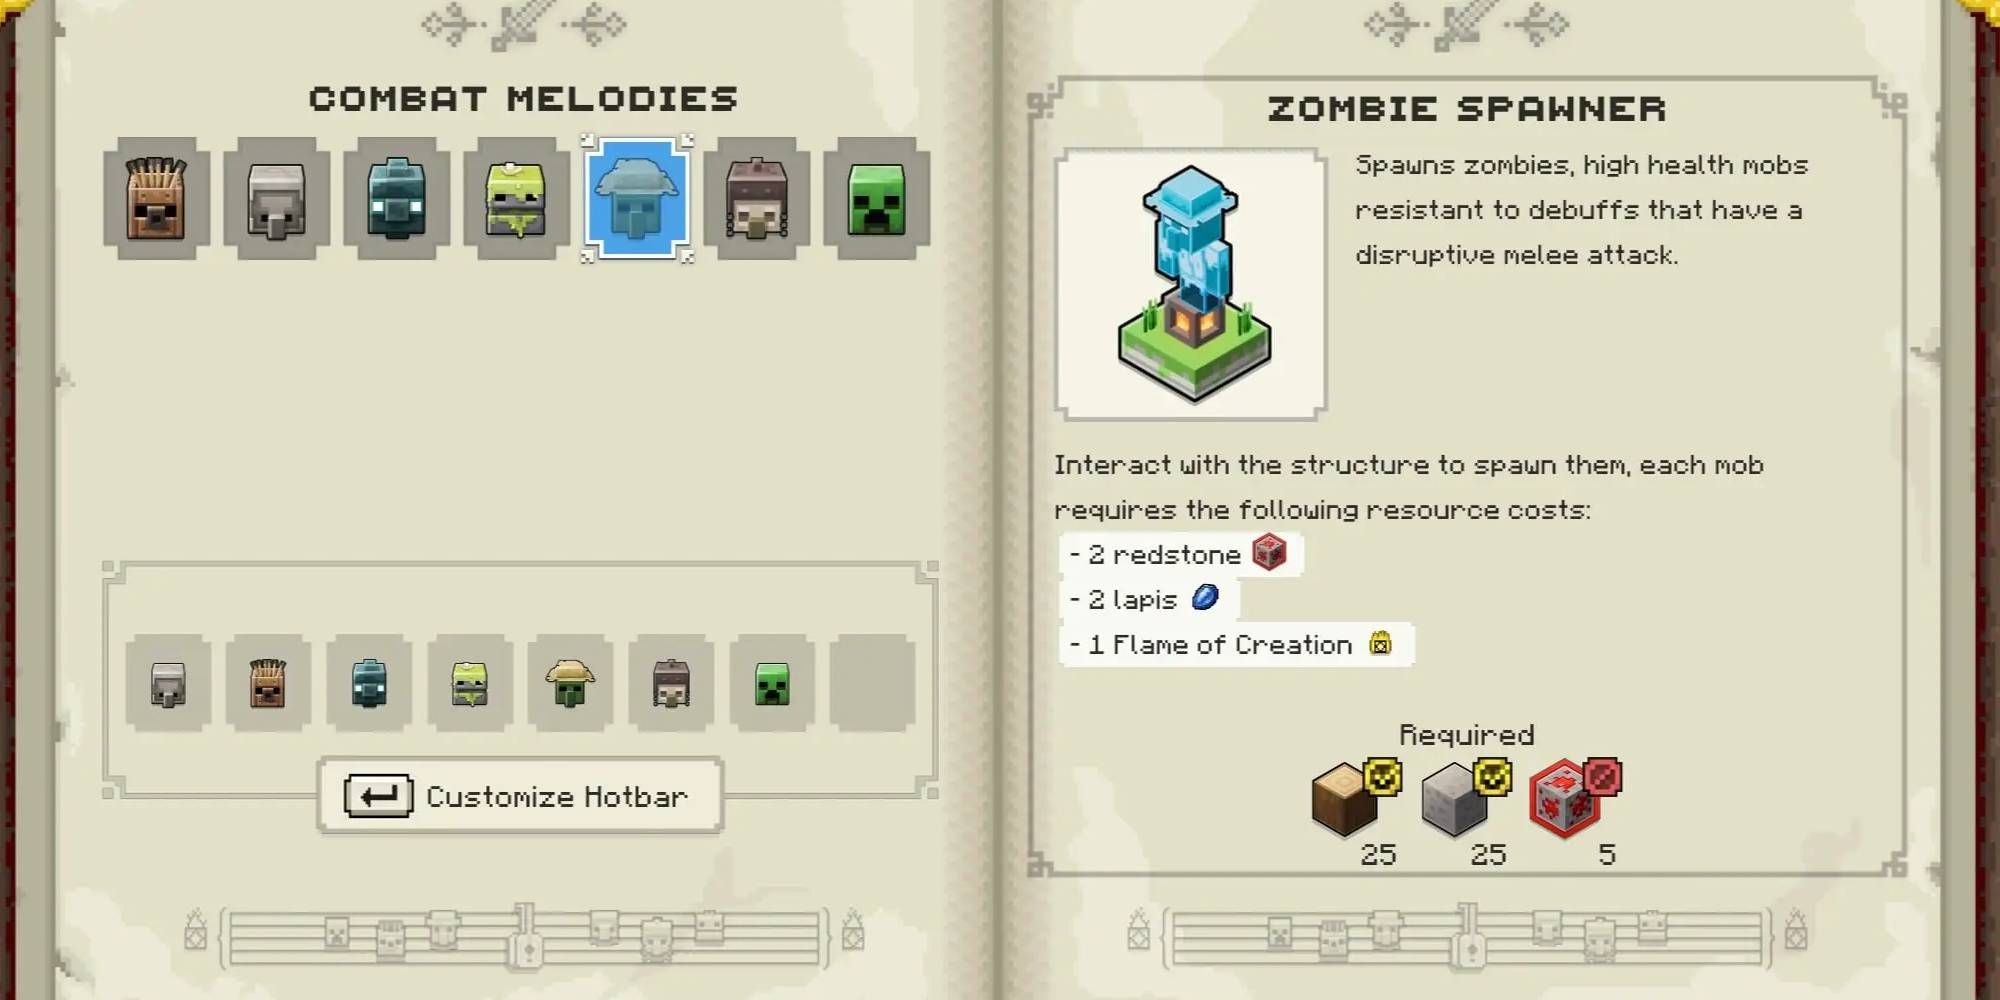 Minecraft Legends Zombie Spawner Combat Melody to Create Friendly Mobs for Battles